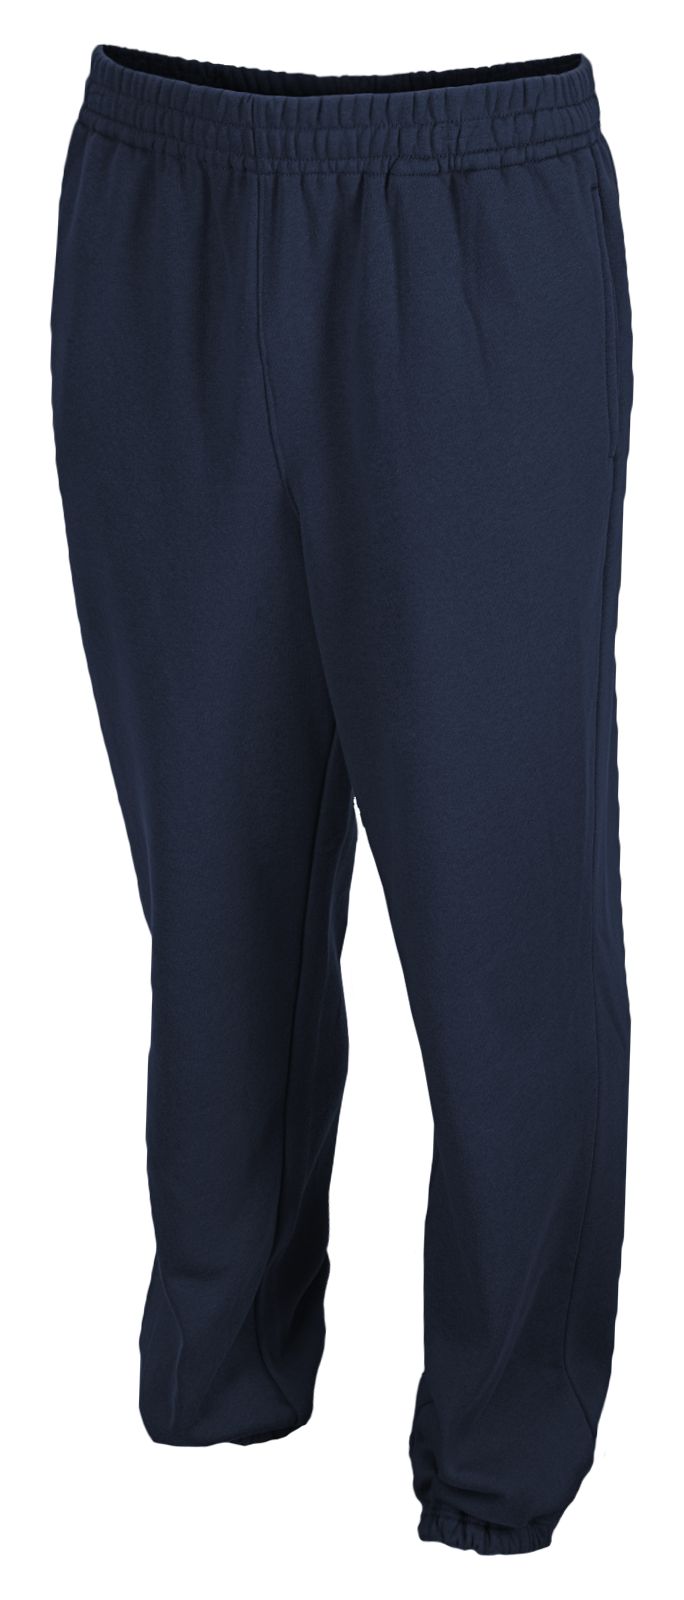 Core Team Pant, Navy image number 1